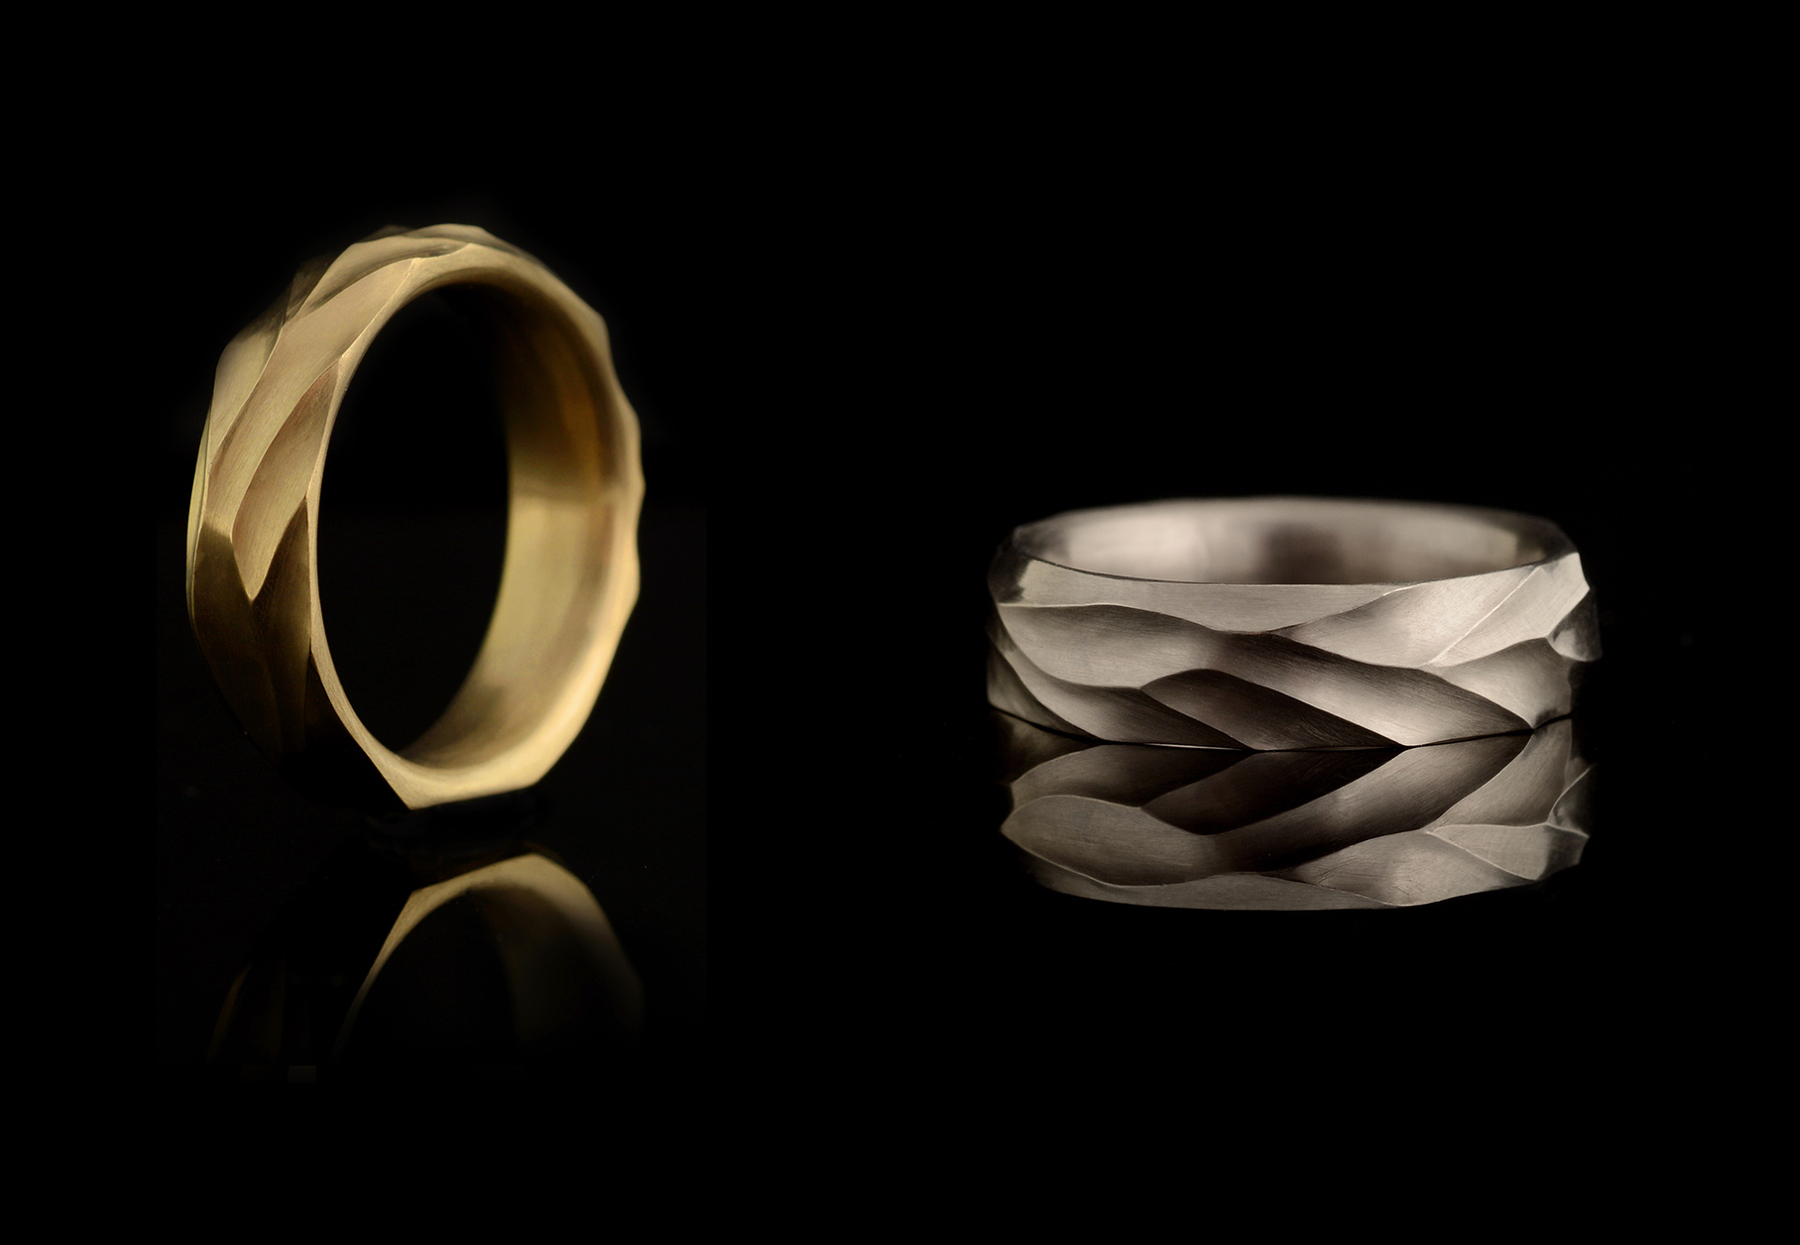 Arris Dune textured wedding rings in yellow and white gold